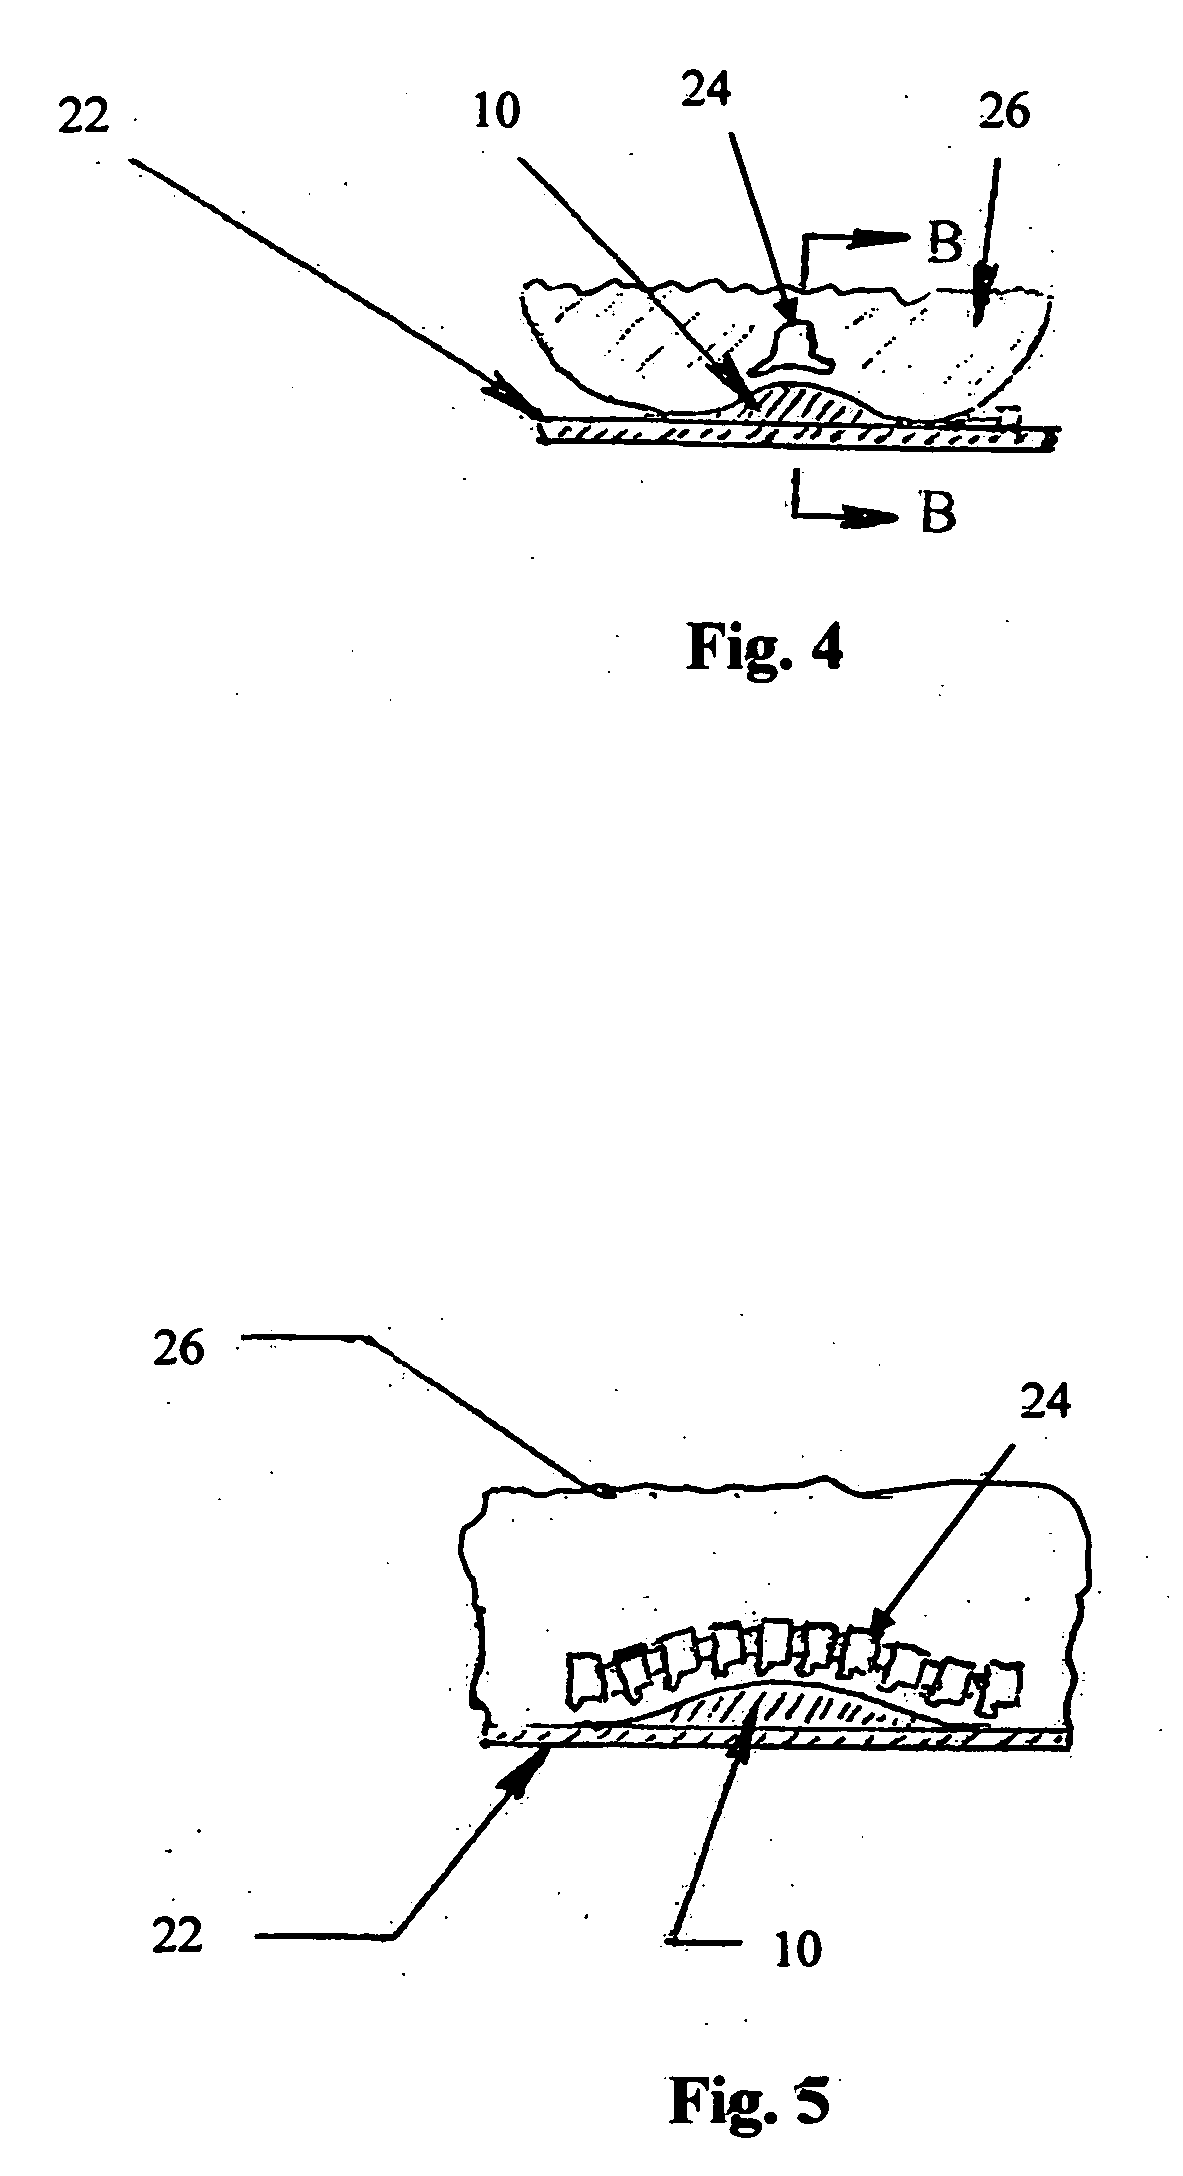 Emergency transport back support apparatus and method